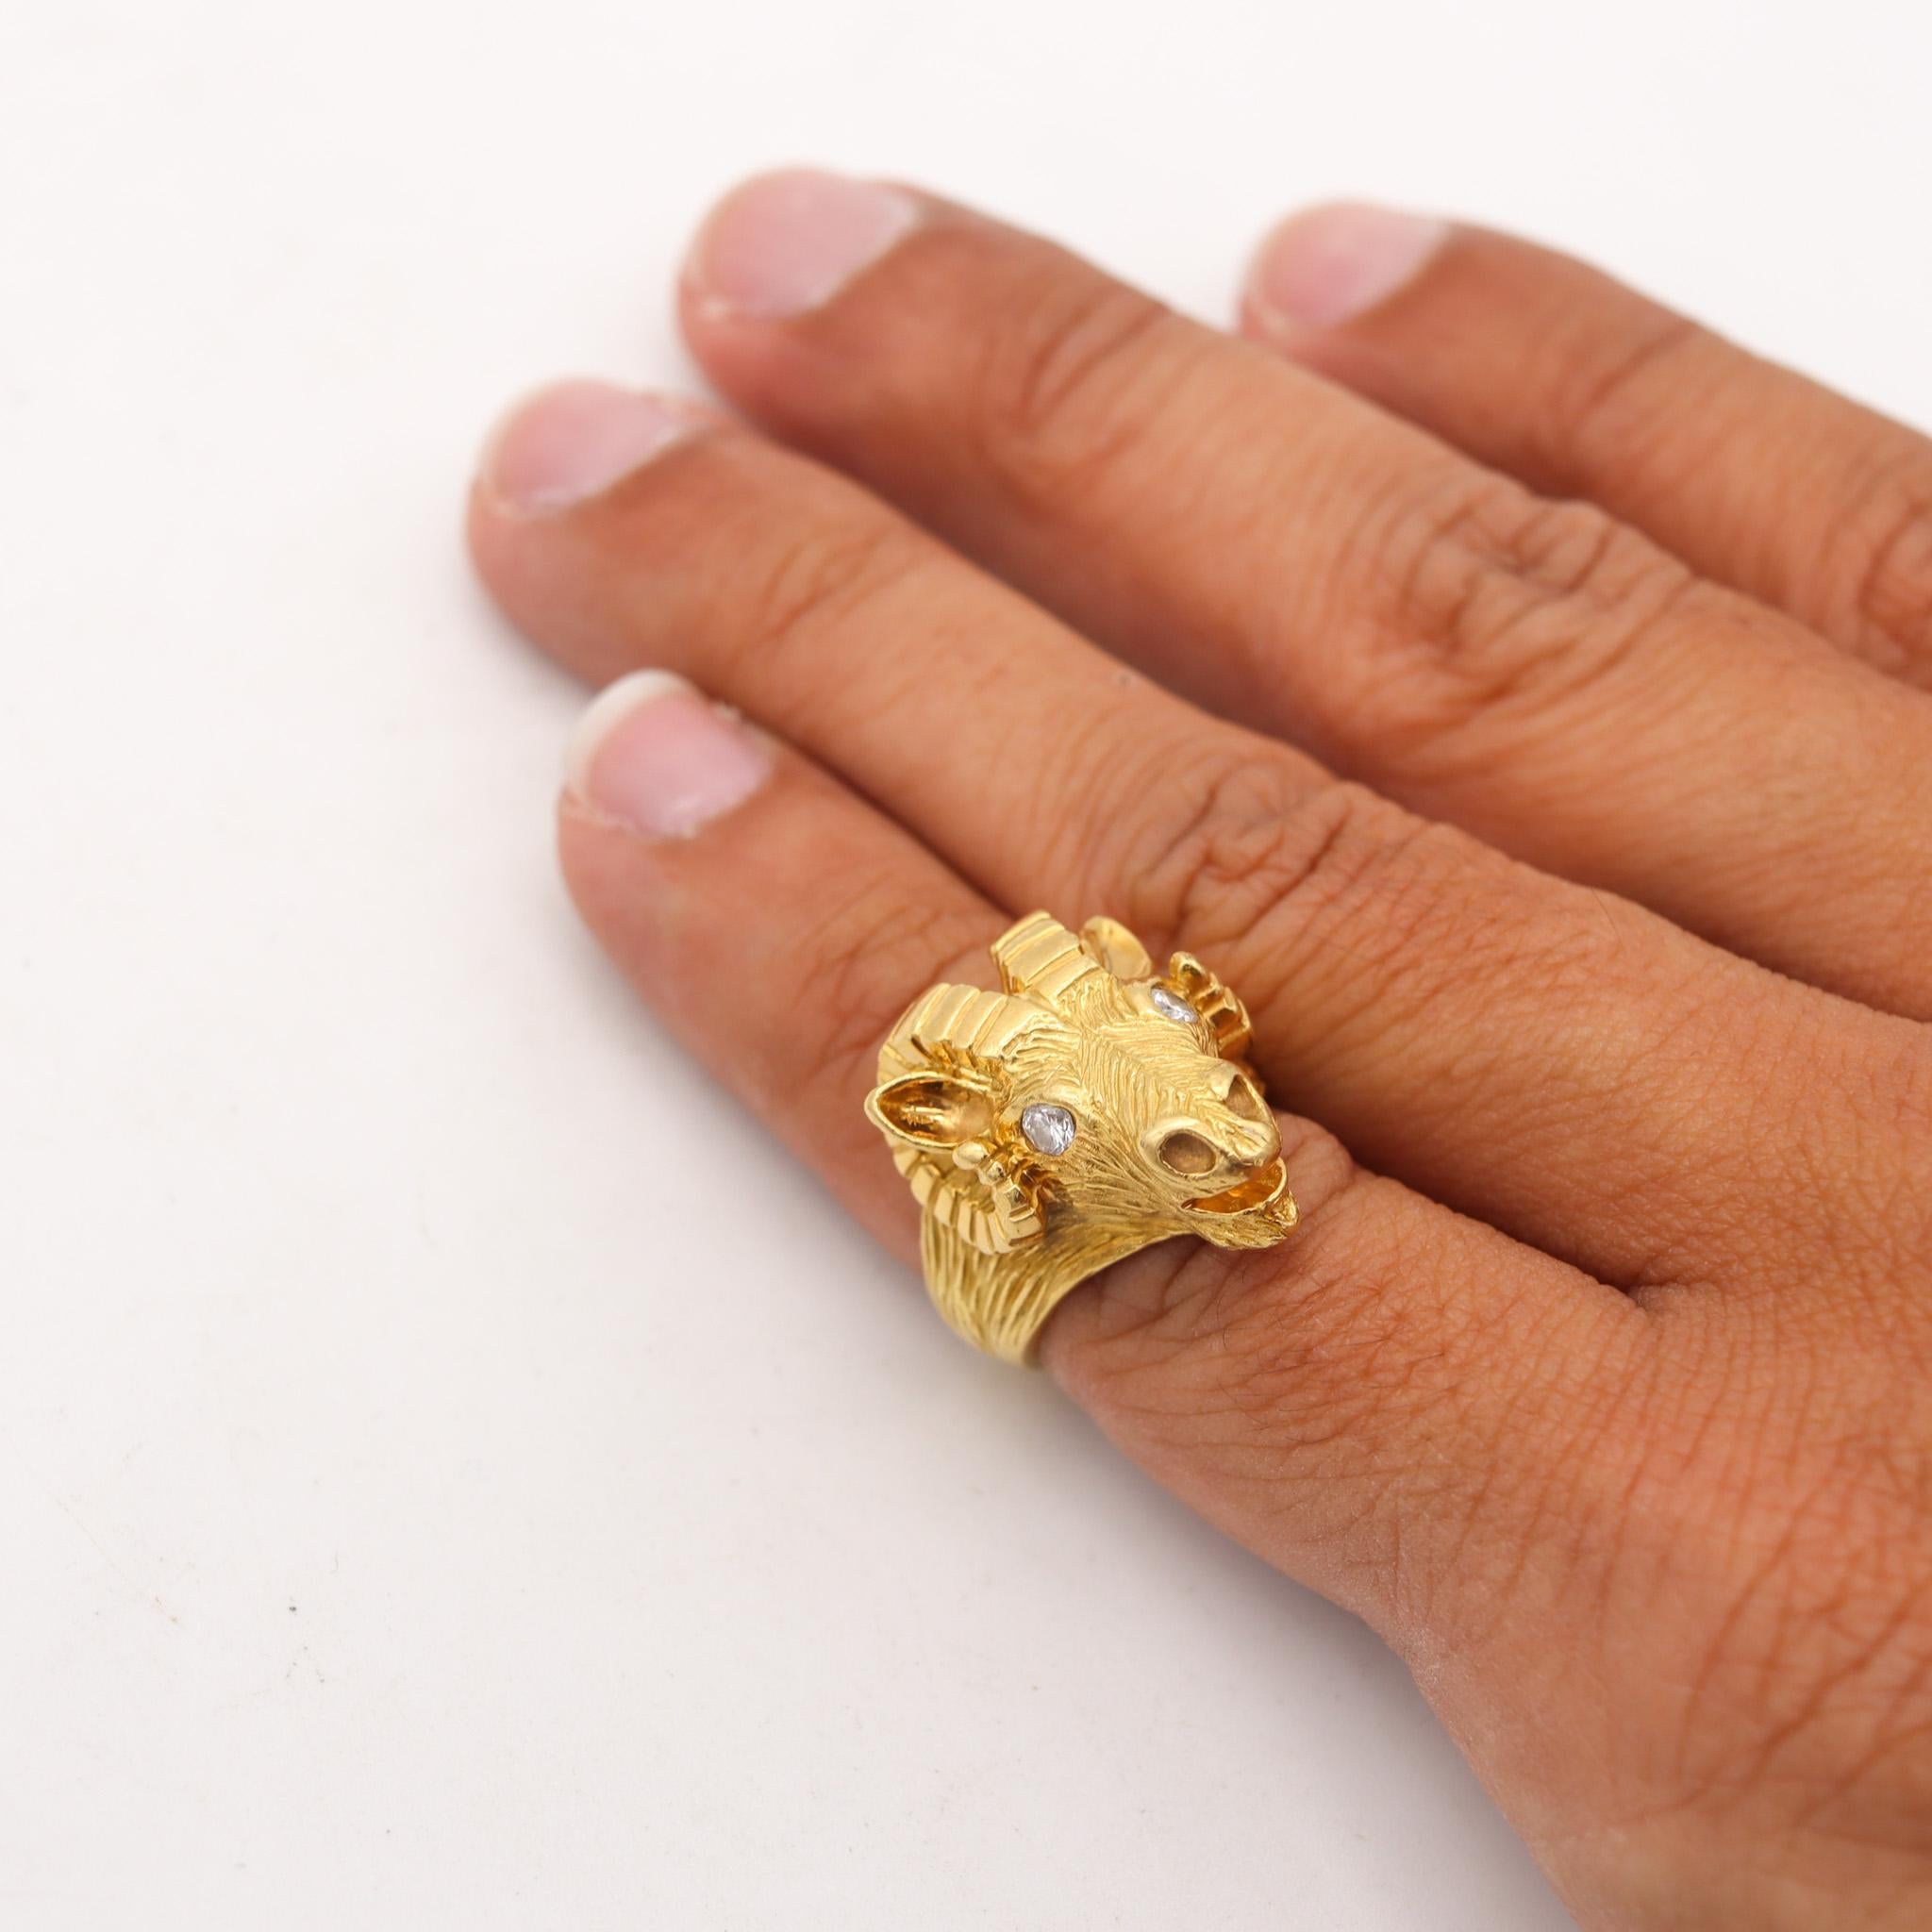 Van Cleef & Arpels 1970 Taurus Zodiacal Ring In 18Kt Gold With Two Diamonds For Sale 1